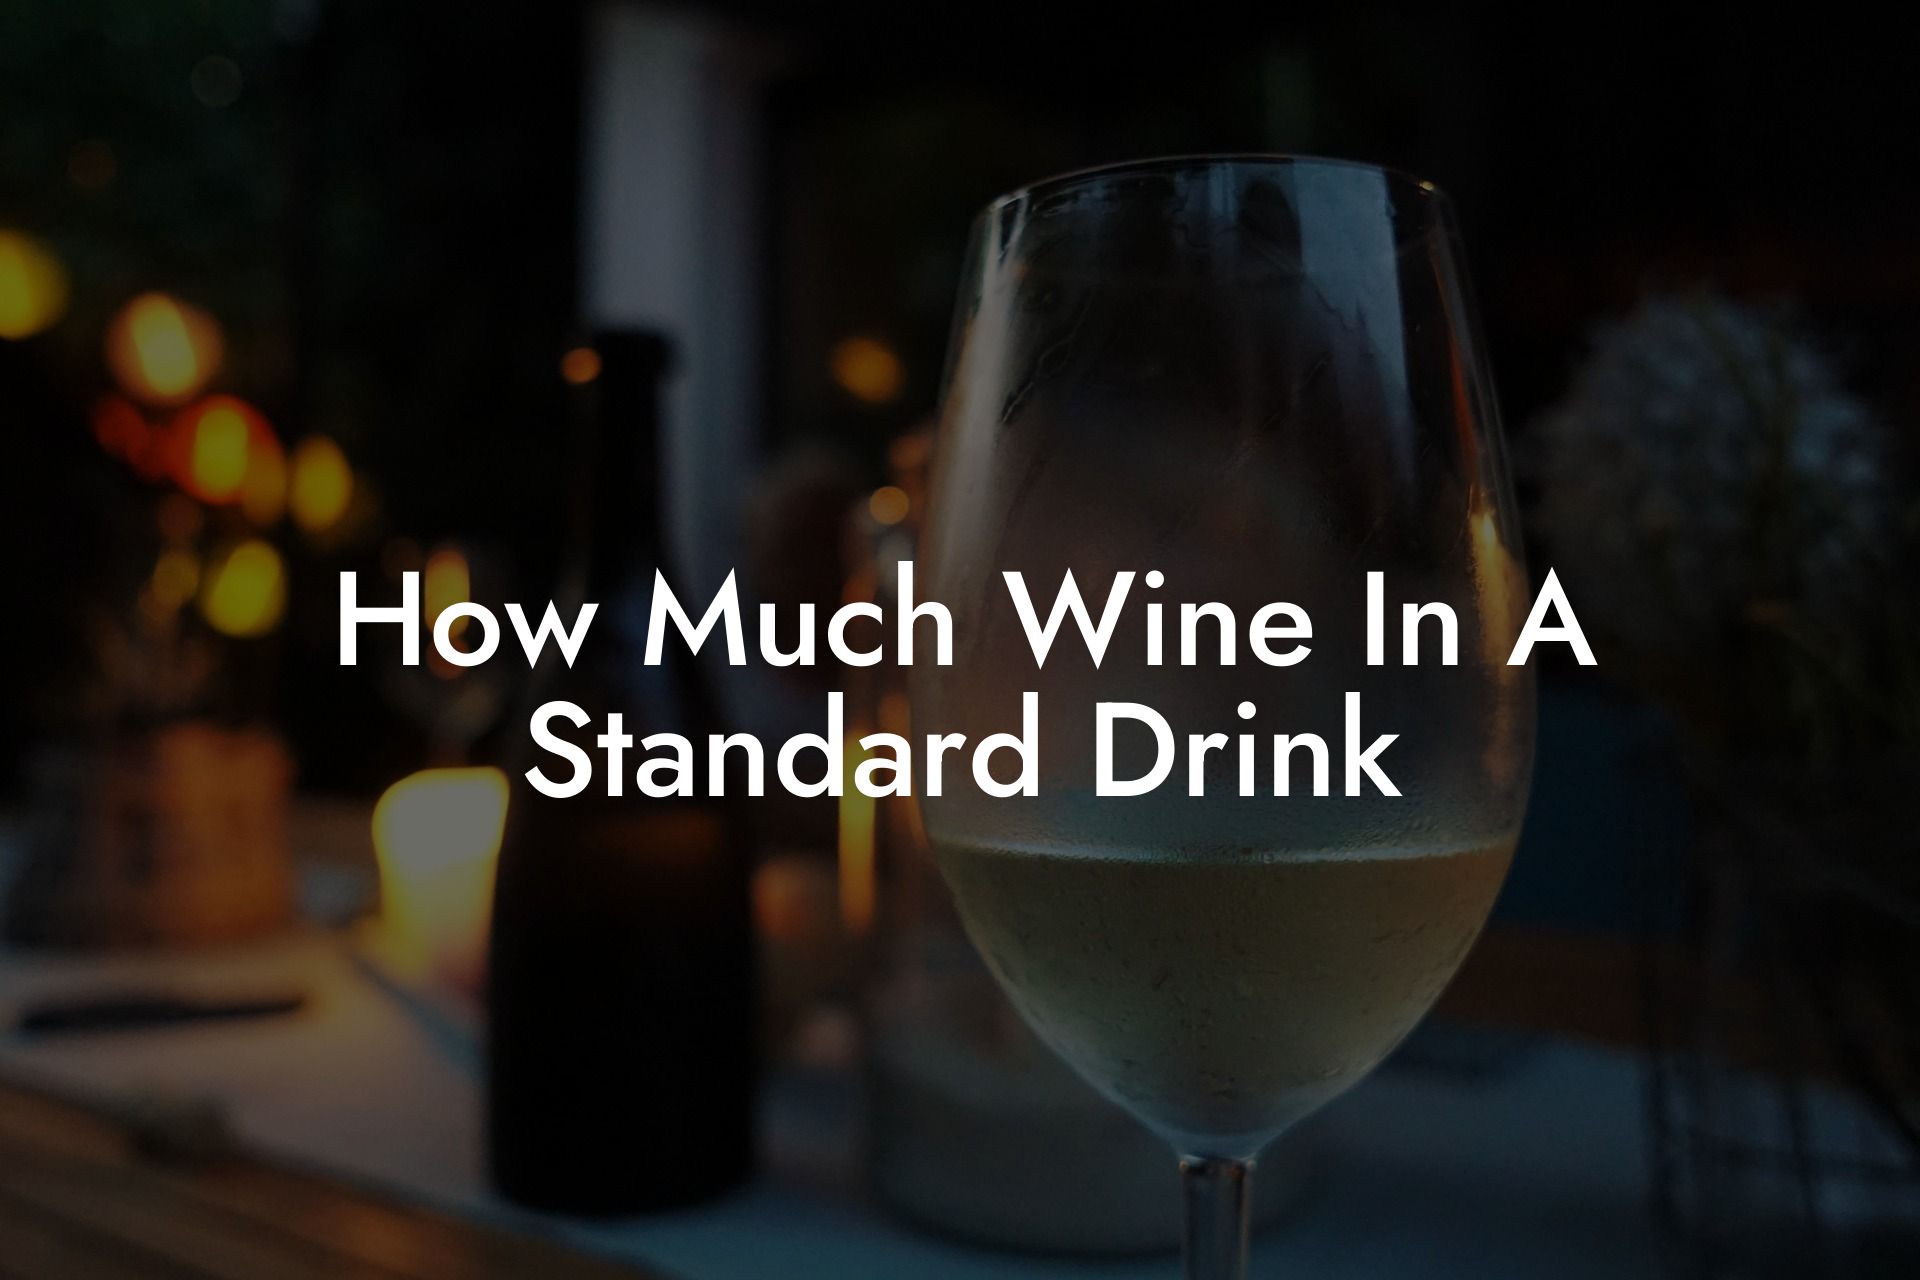 How Much Wine In A Standard Drink